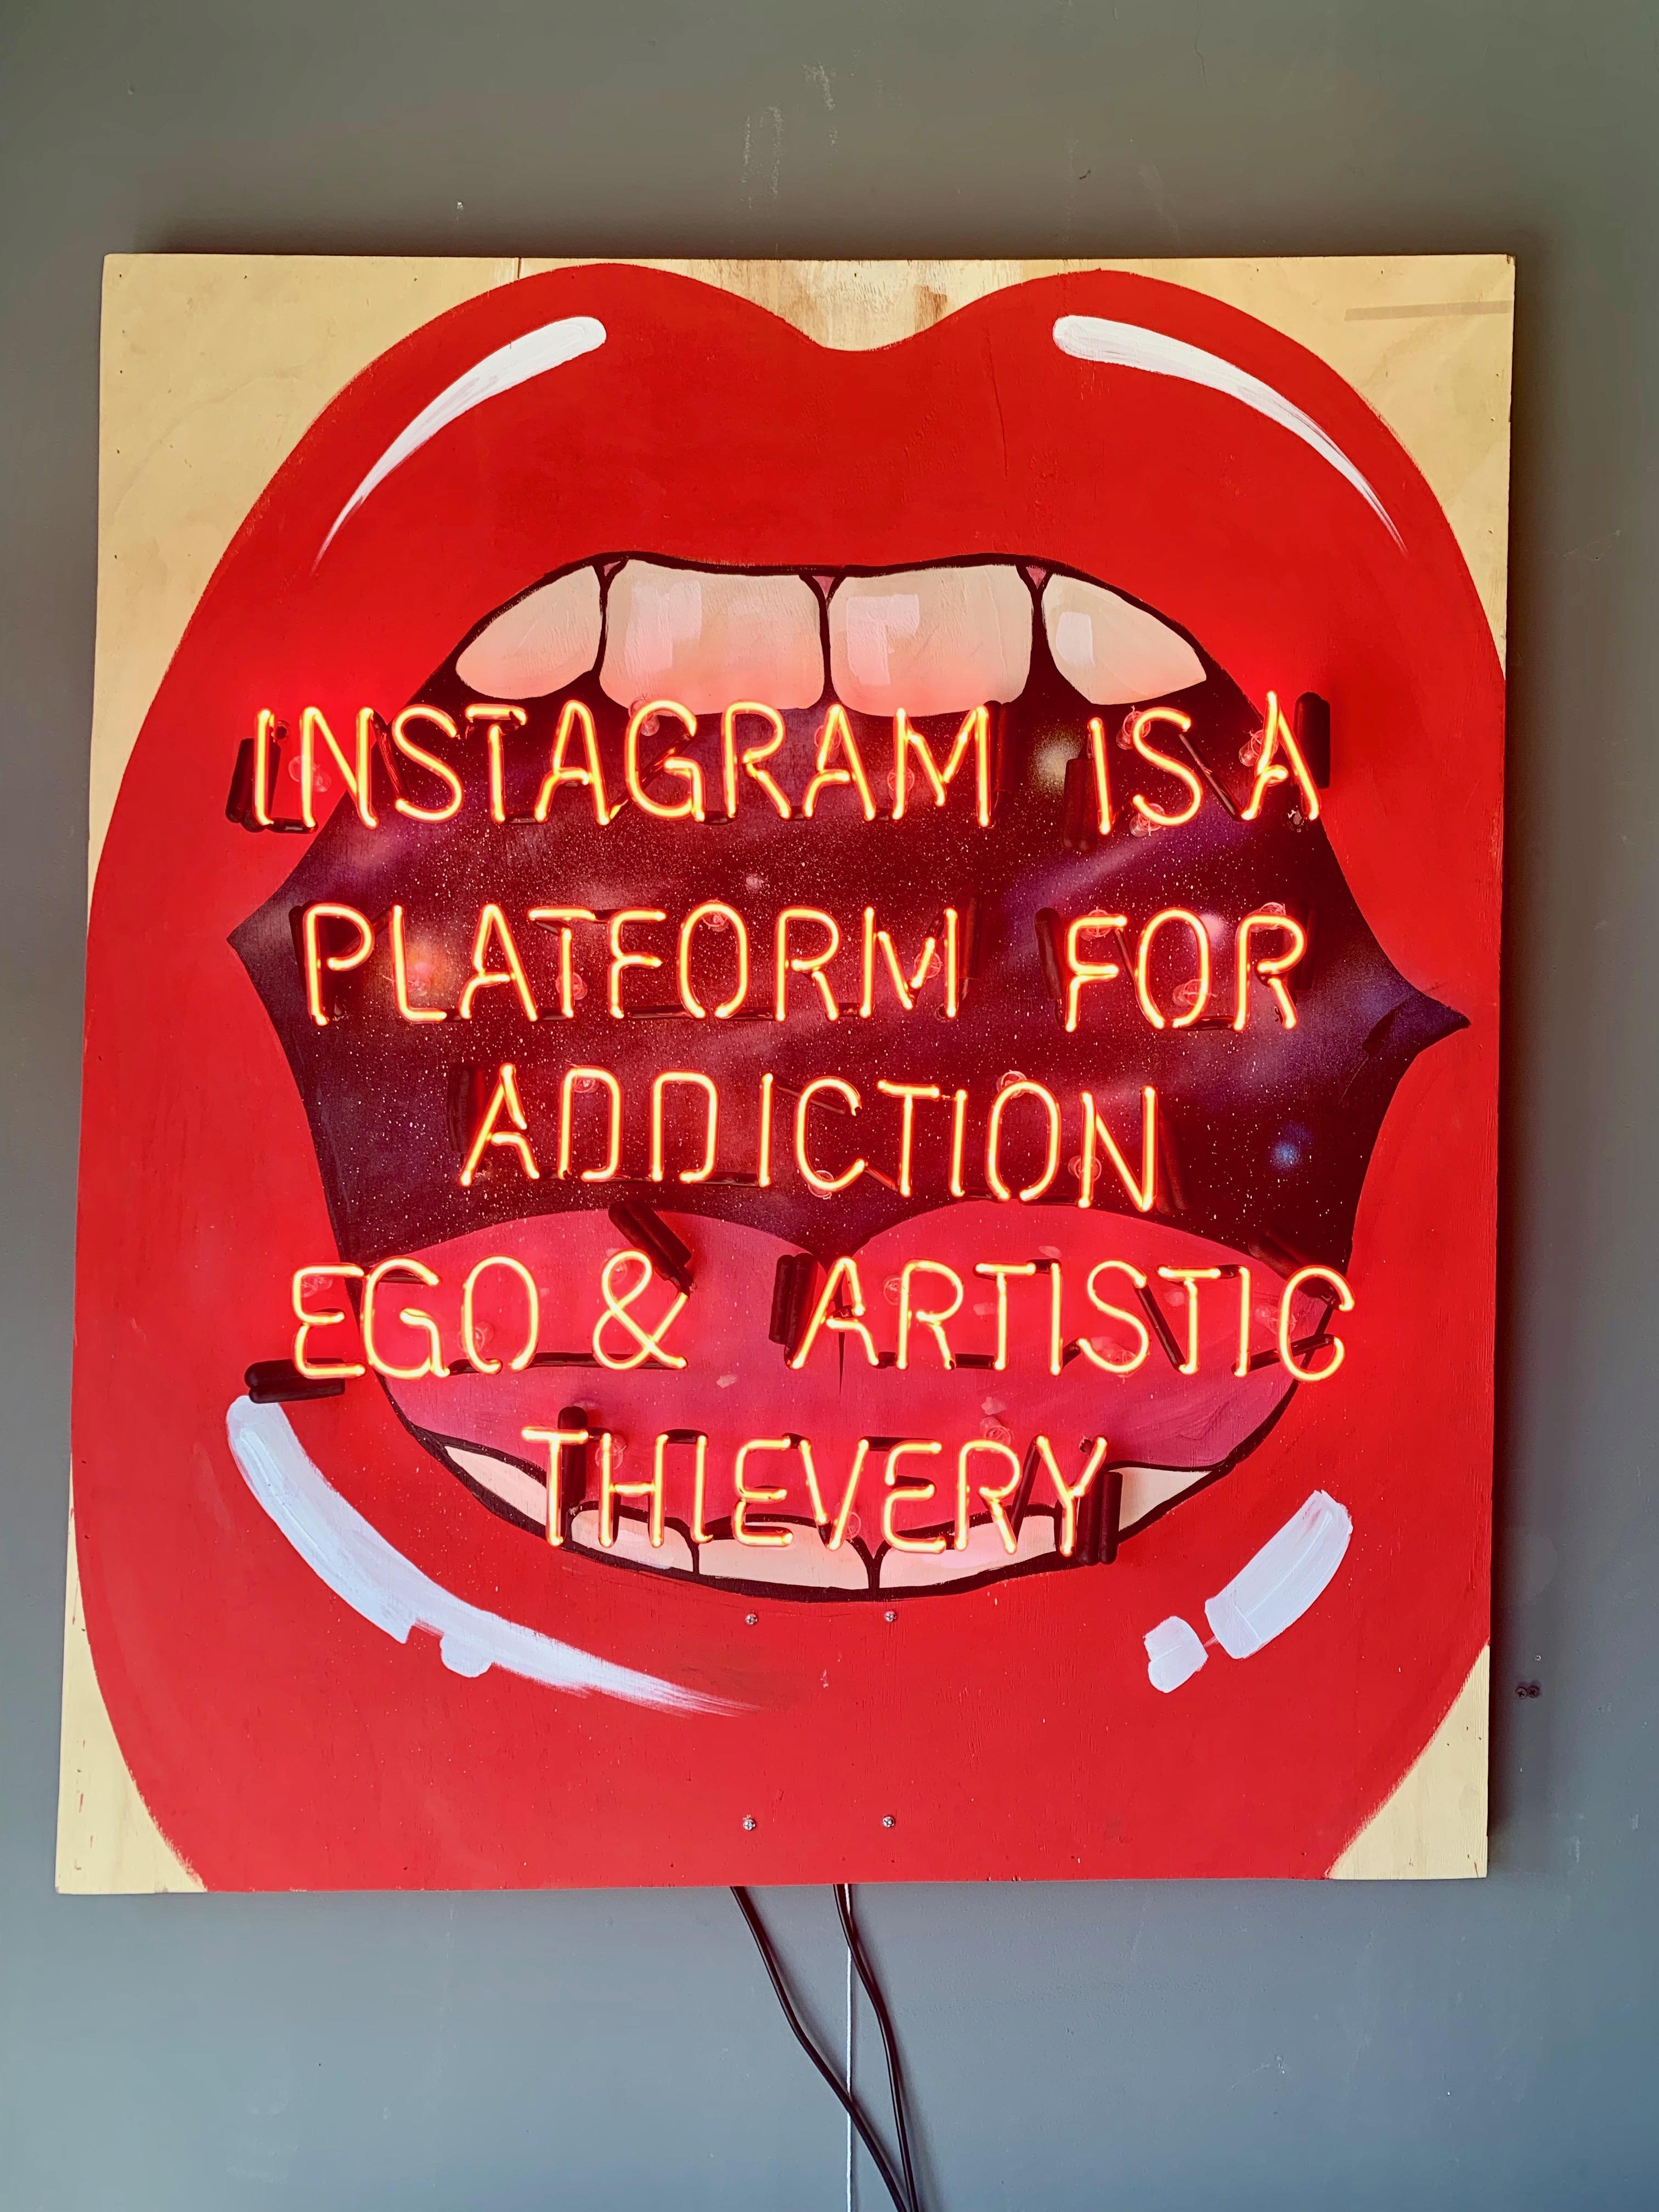 Collaborative original artwork by neon artist Tory DiPietro and street artist Jules Muck. Hand painted Muck Mouth on a wood backdrop with neon message on the forefront. The piece demonstrates the effects of social media on the human experience.